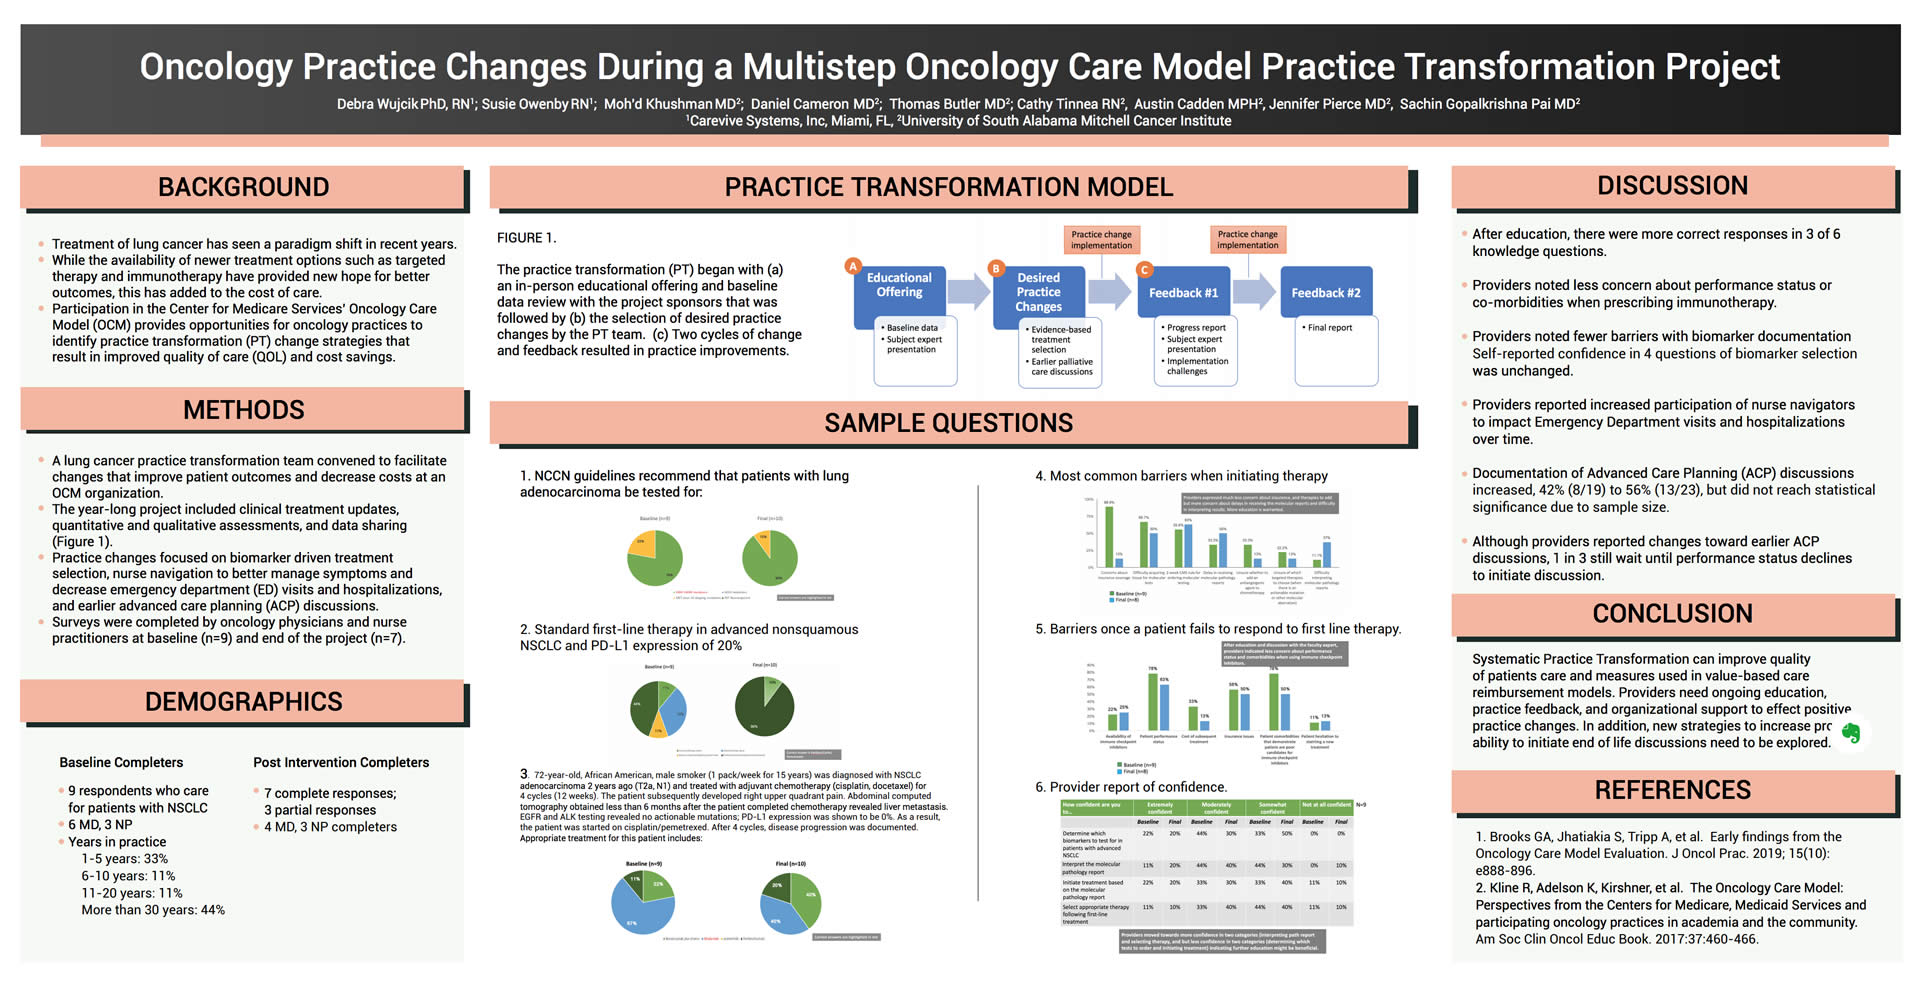 Oncology Practice Changes During a Multistep Oncology Care Model Practice Transformation Project